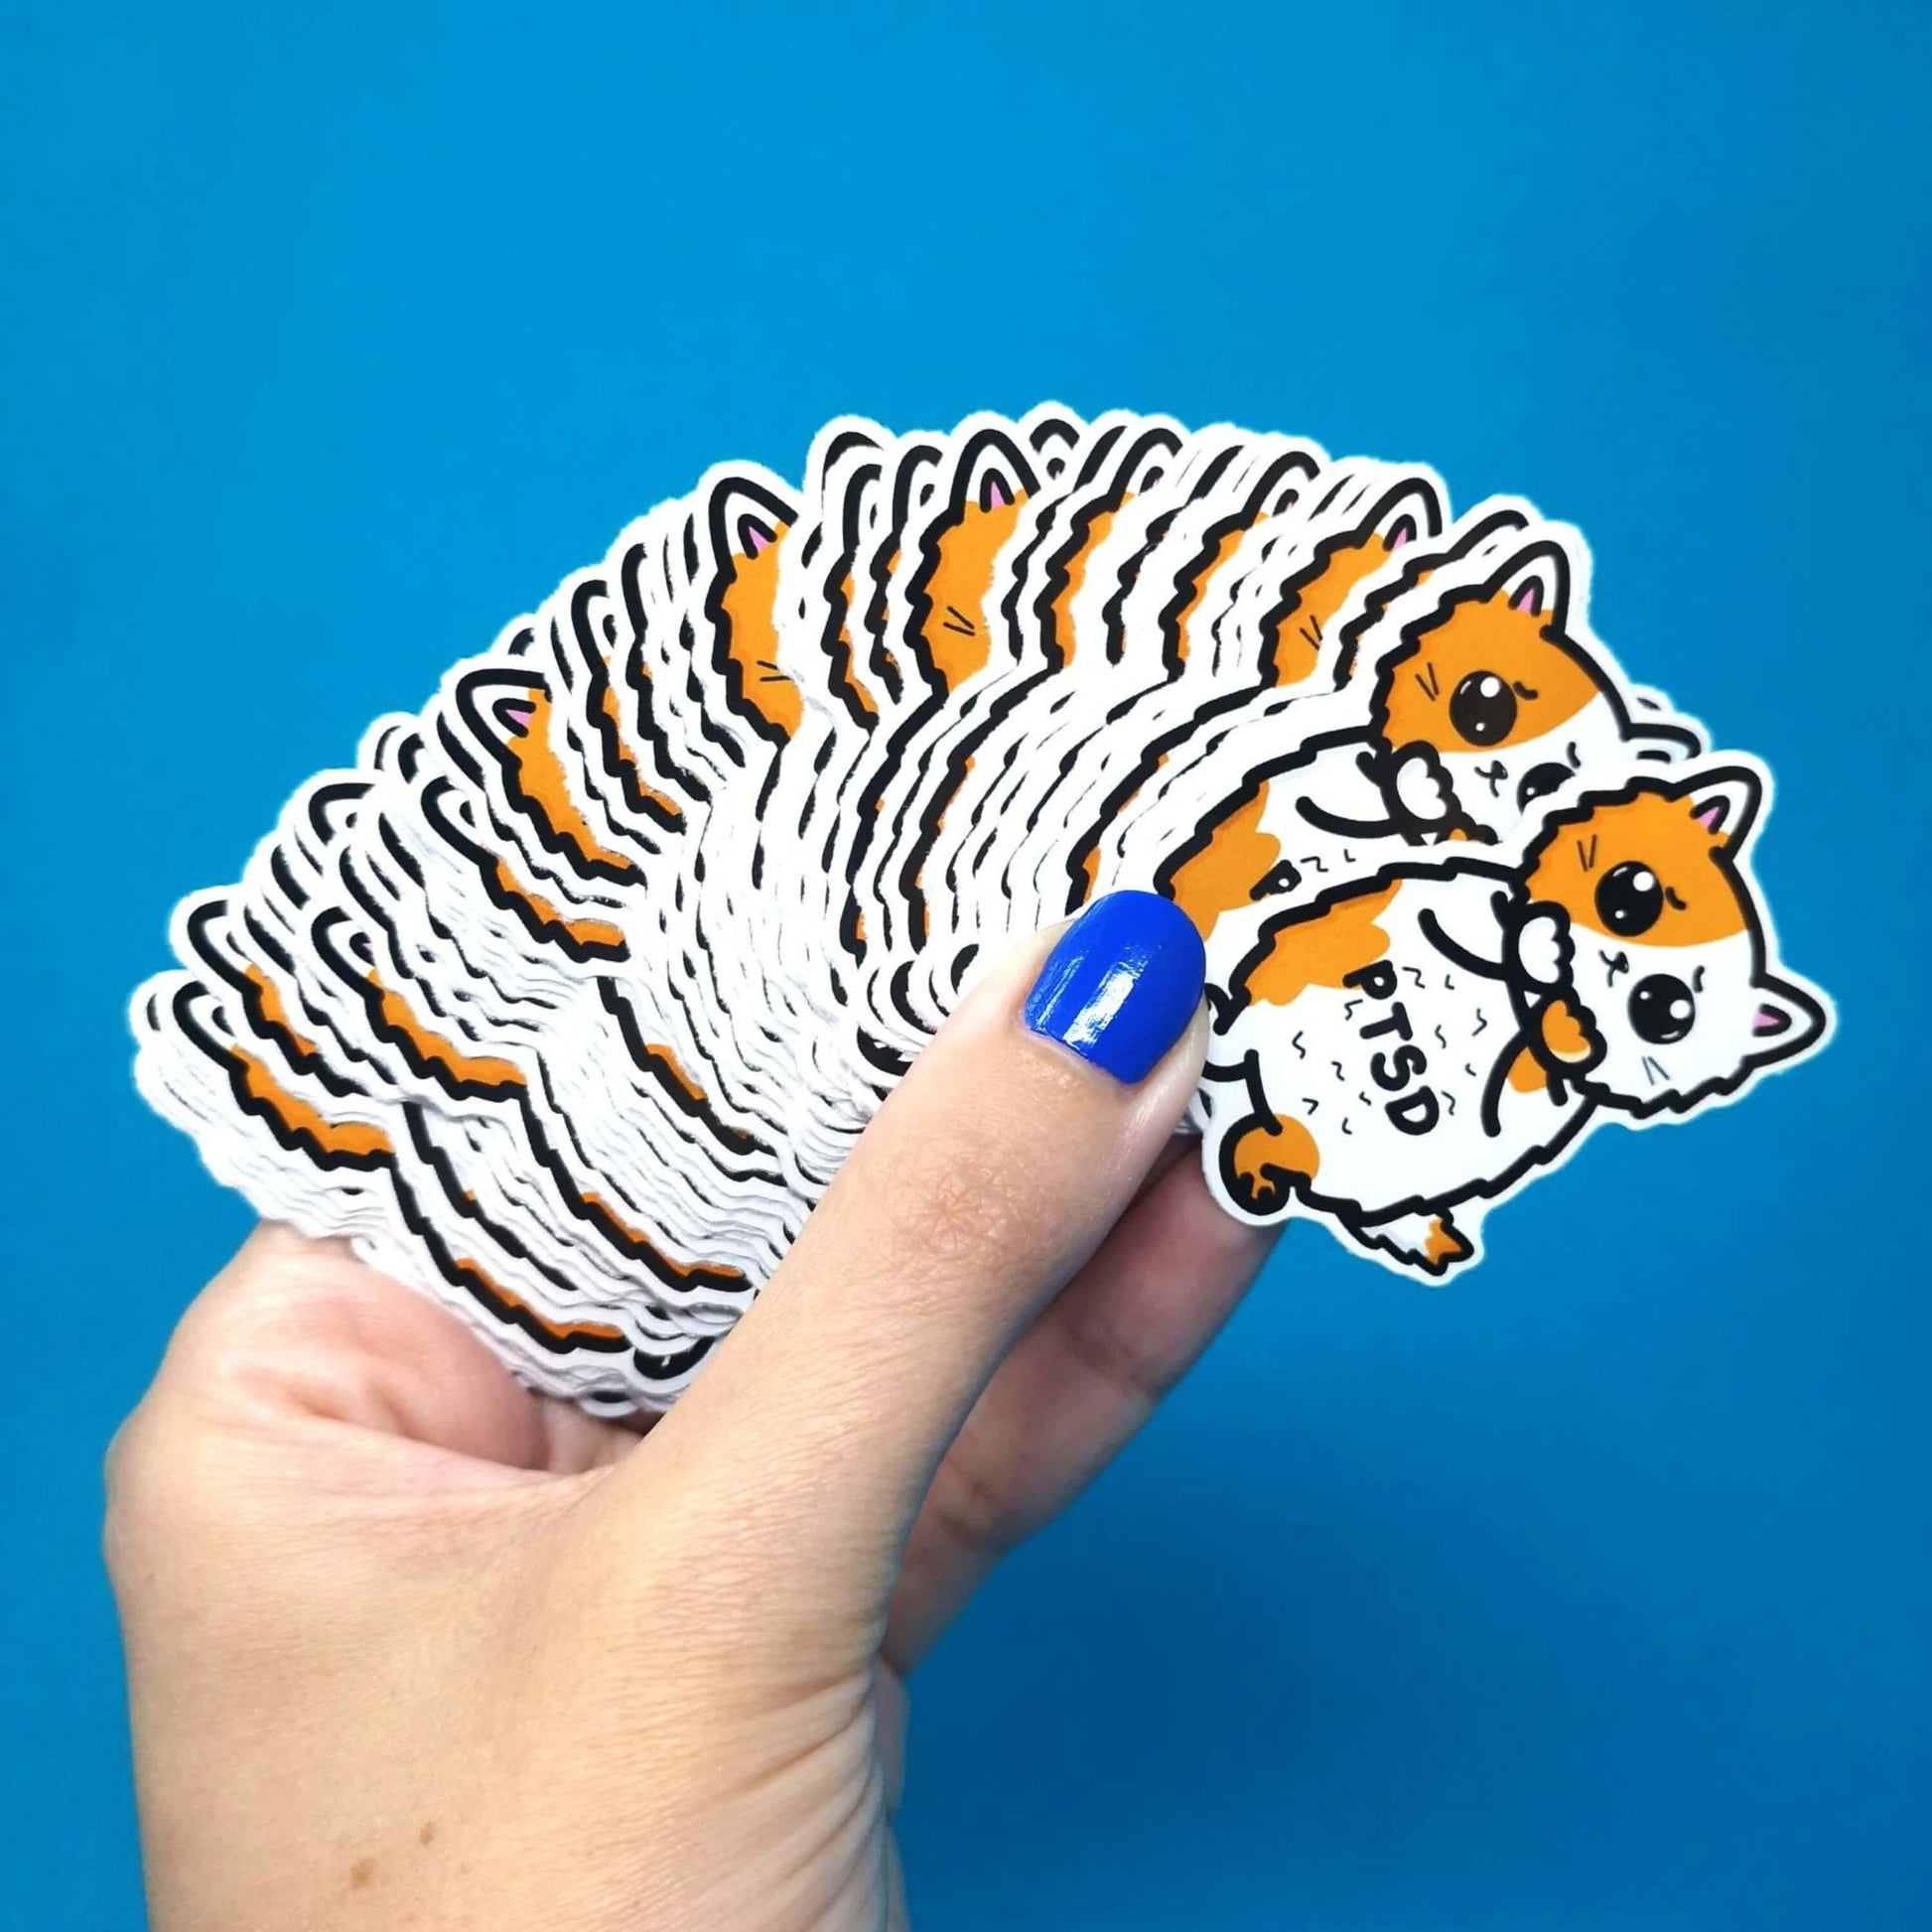 The PTSD Cat Sticker - Post-Traumatic Stress Disorder held in a pile over a blue background. The orange and white scared cat sticker has black text across its middle reading 'PTSD'. The hand drawn design is raising awareness for post traumatic stress disorder.